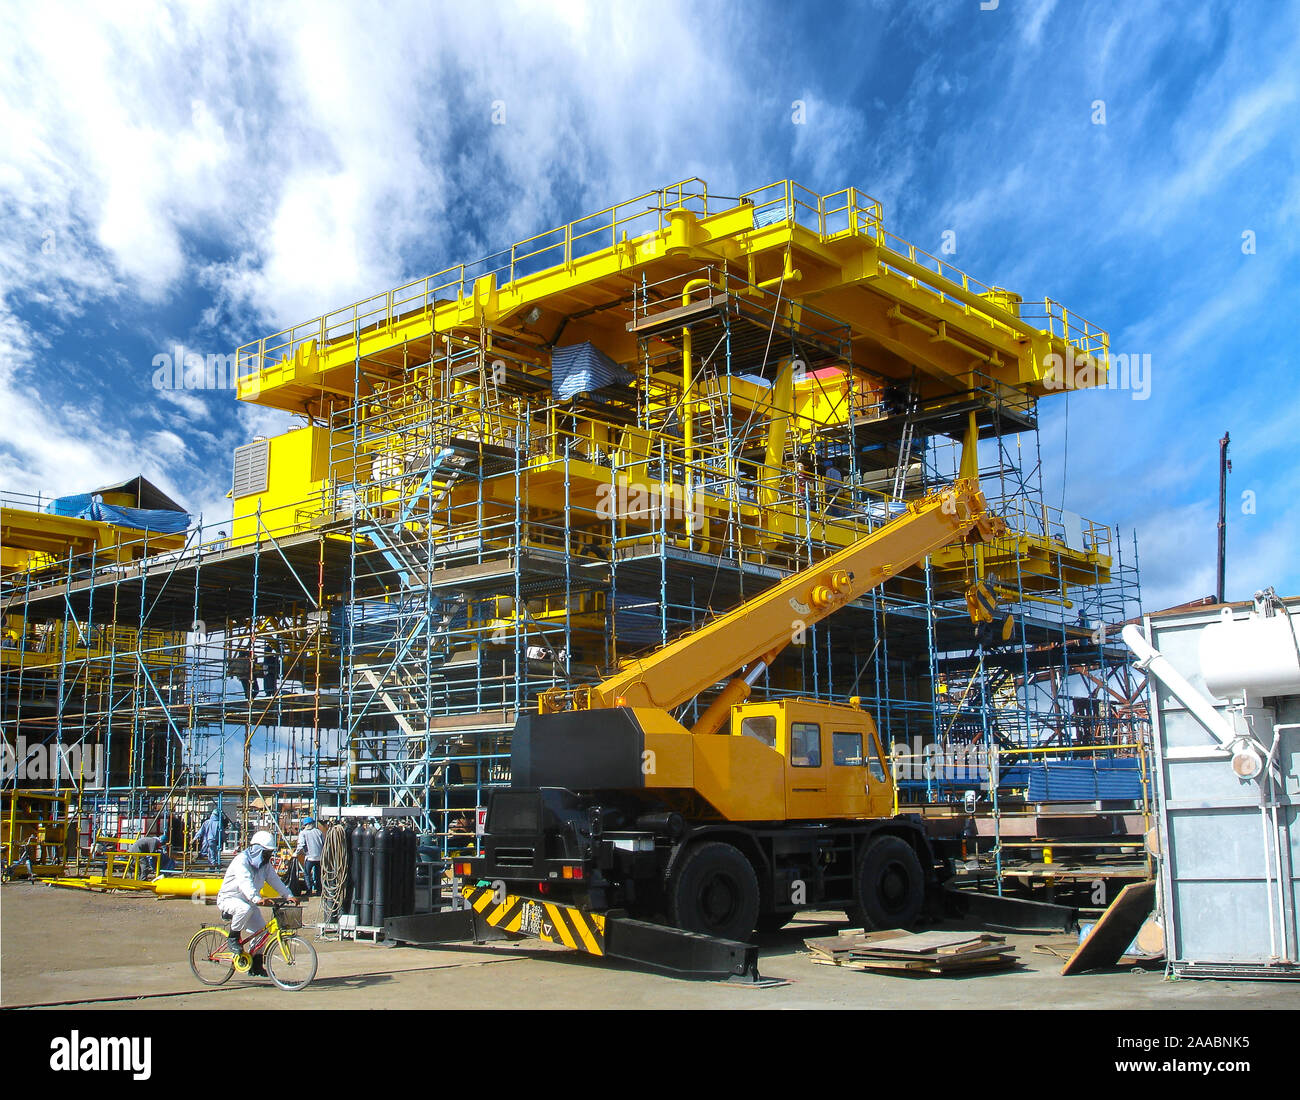 Offshore oil rig platform during construction site in the harbor yard. Stock Photo